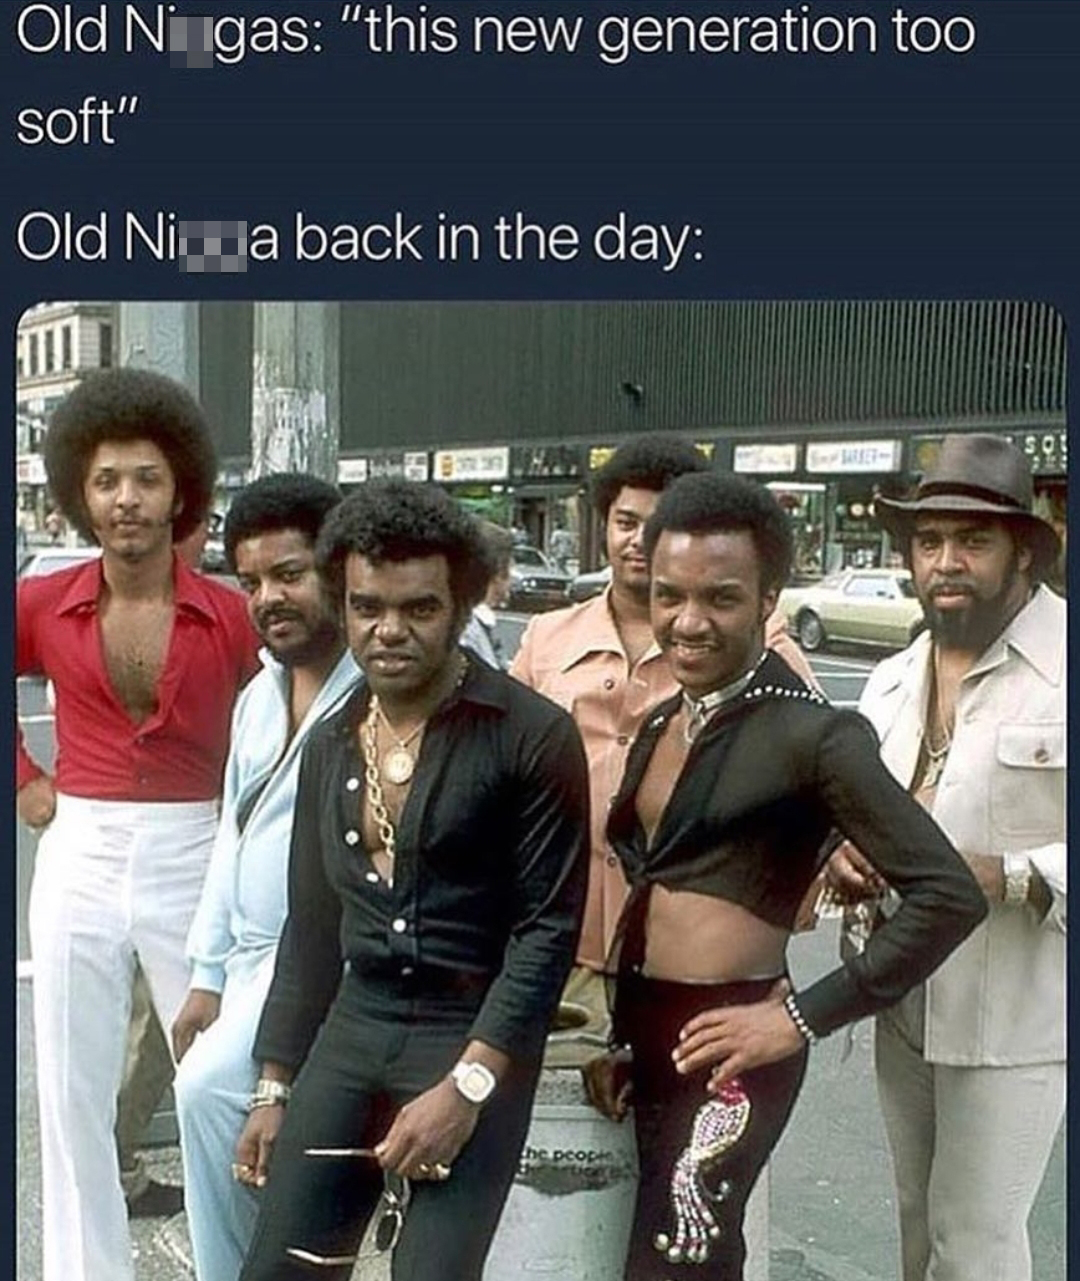 meme isley brothers old - Old Ni gas "this new generation too soft" Old Nii wa back in the day